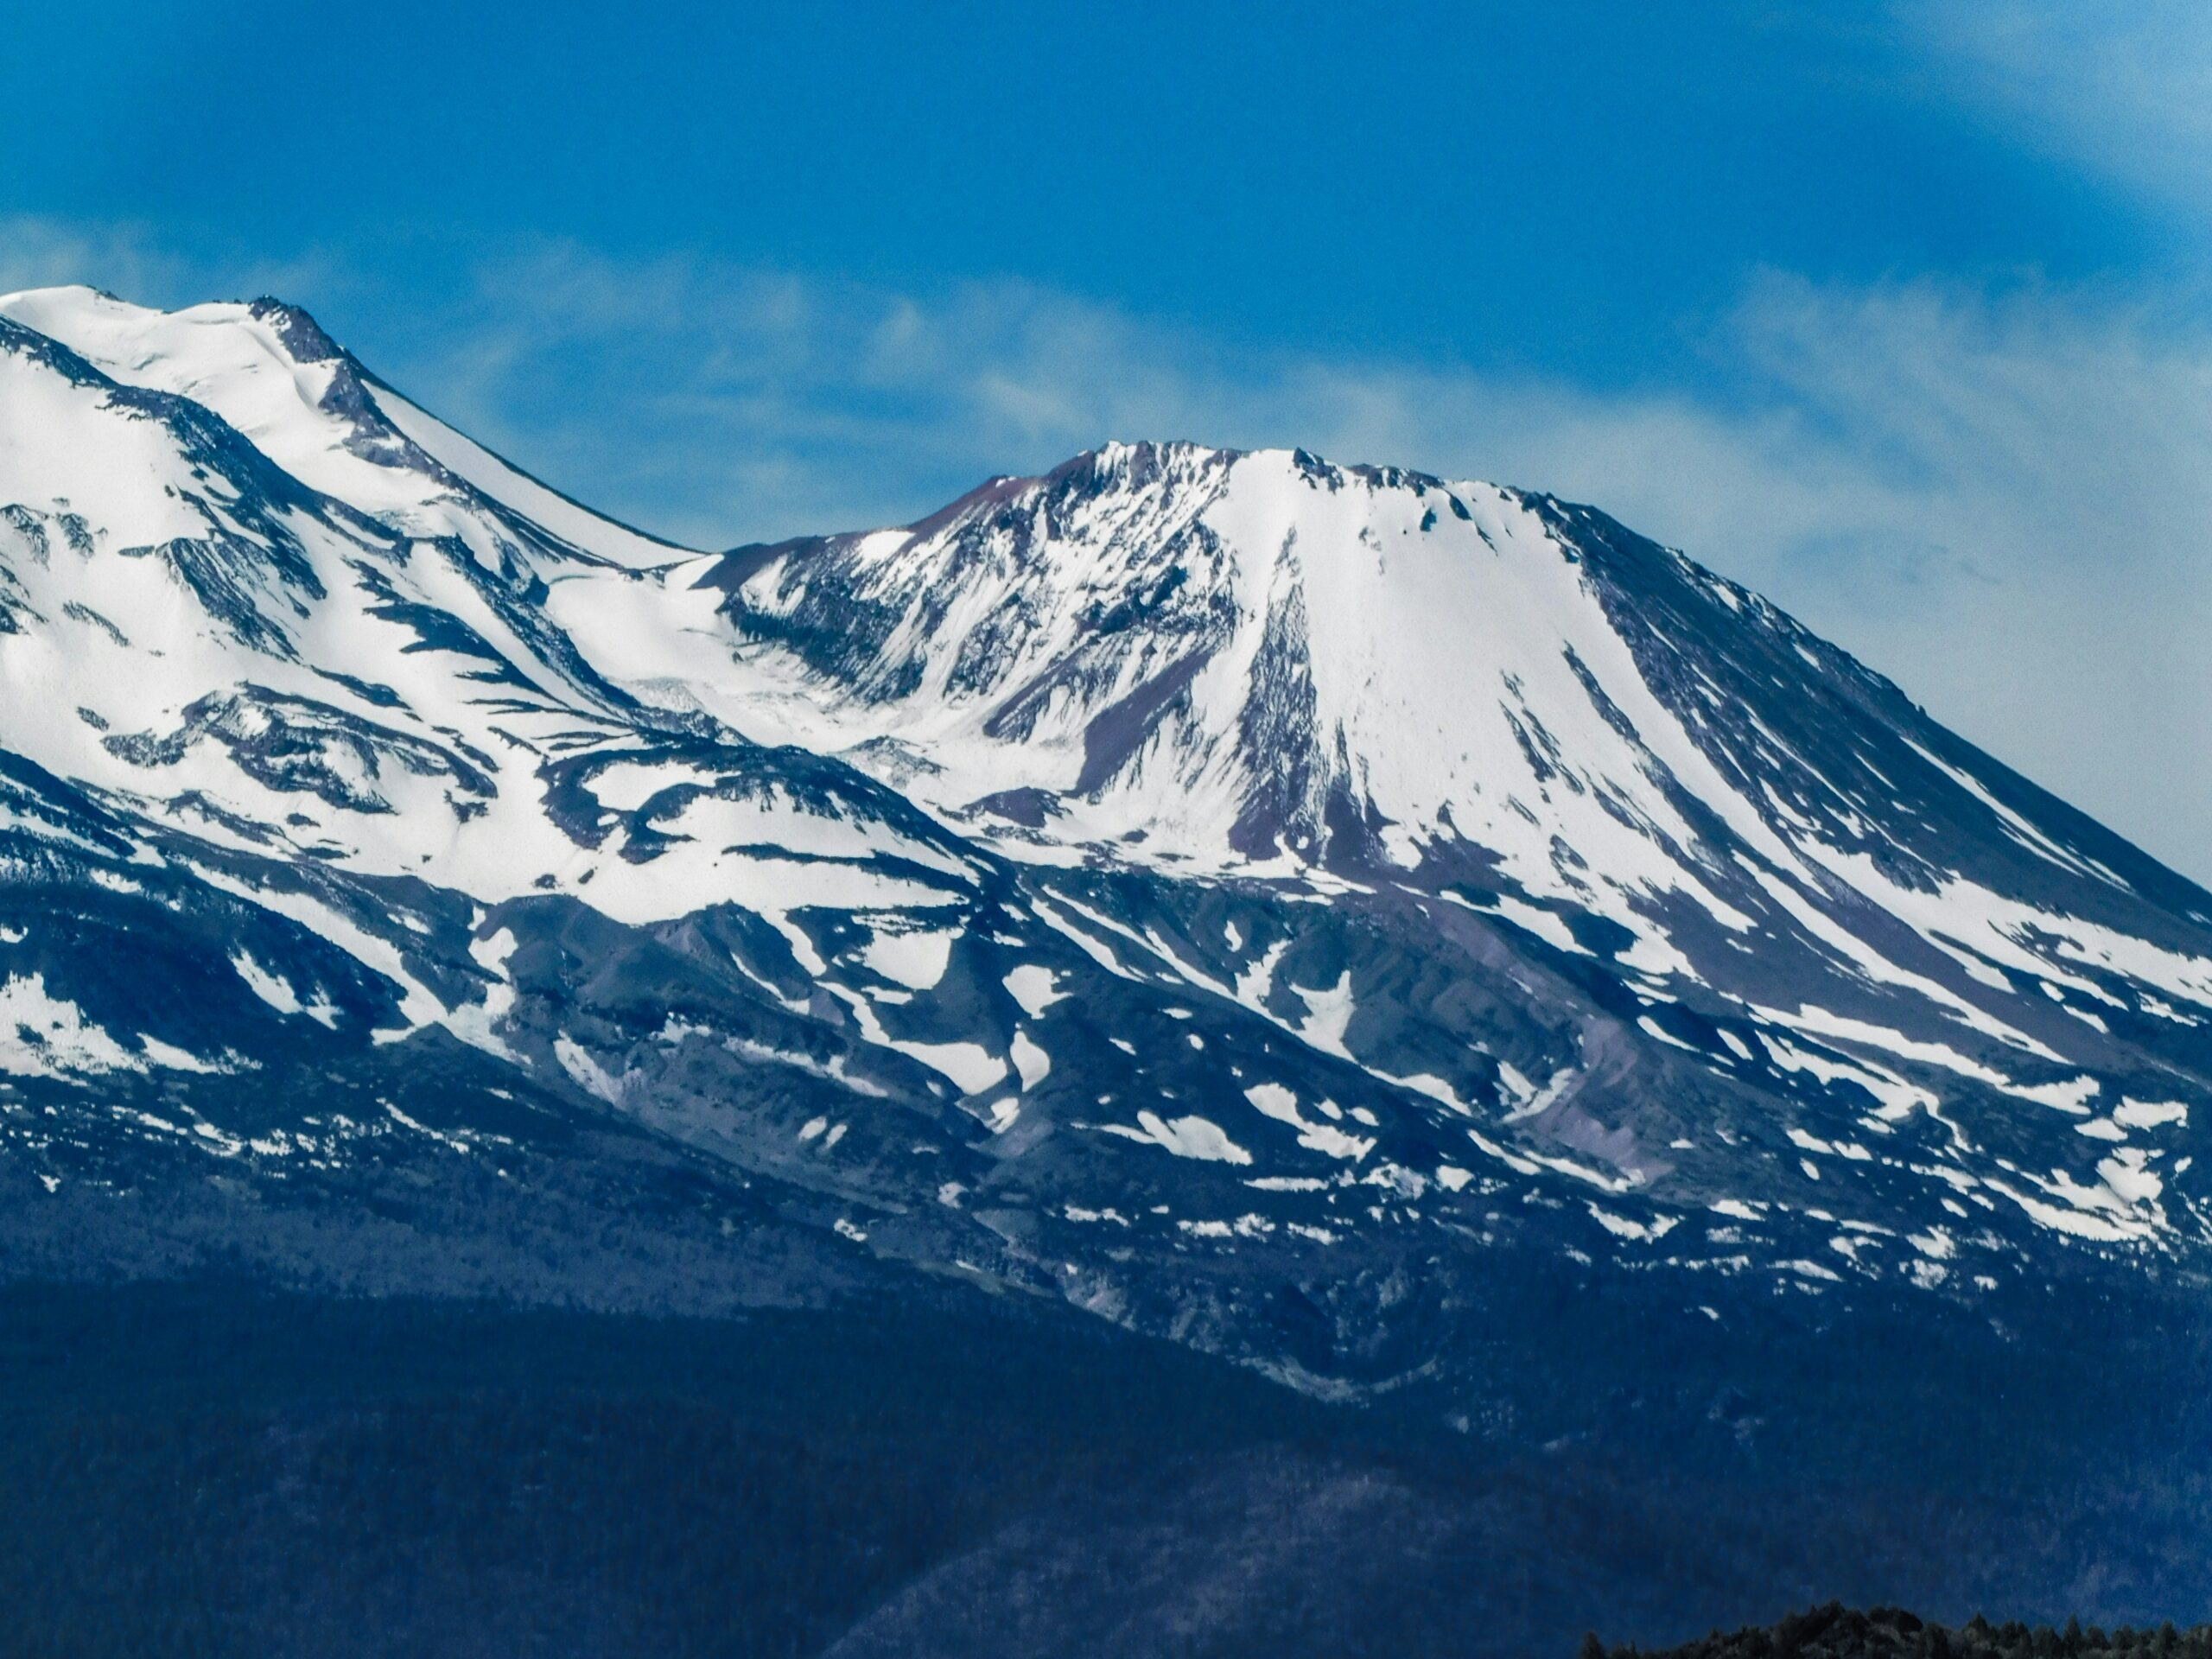 How Do I Navigate The Route On Mount Shasta?